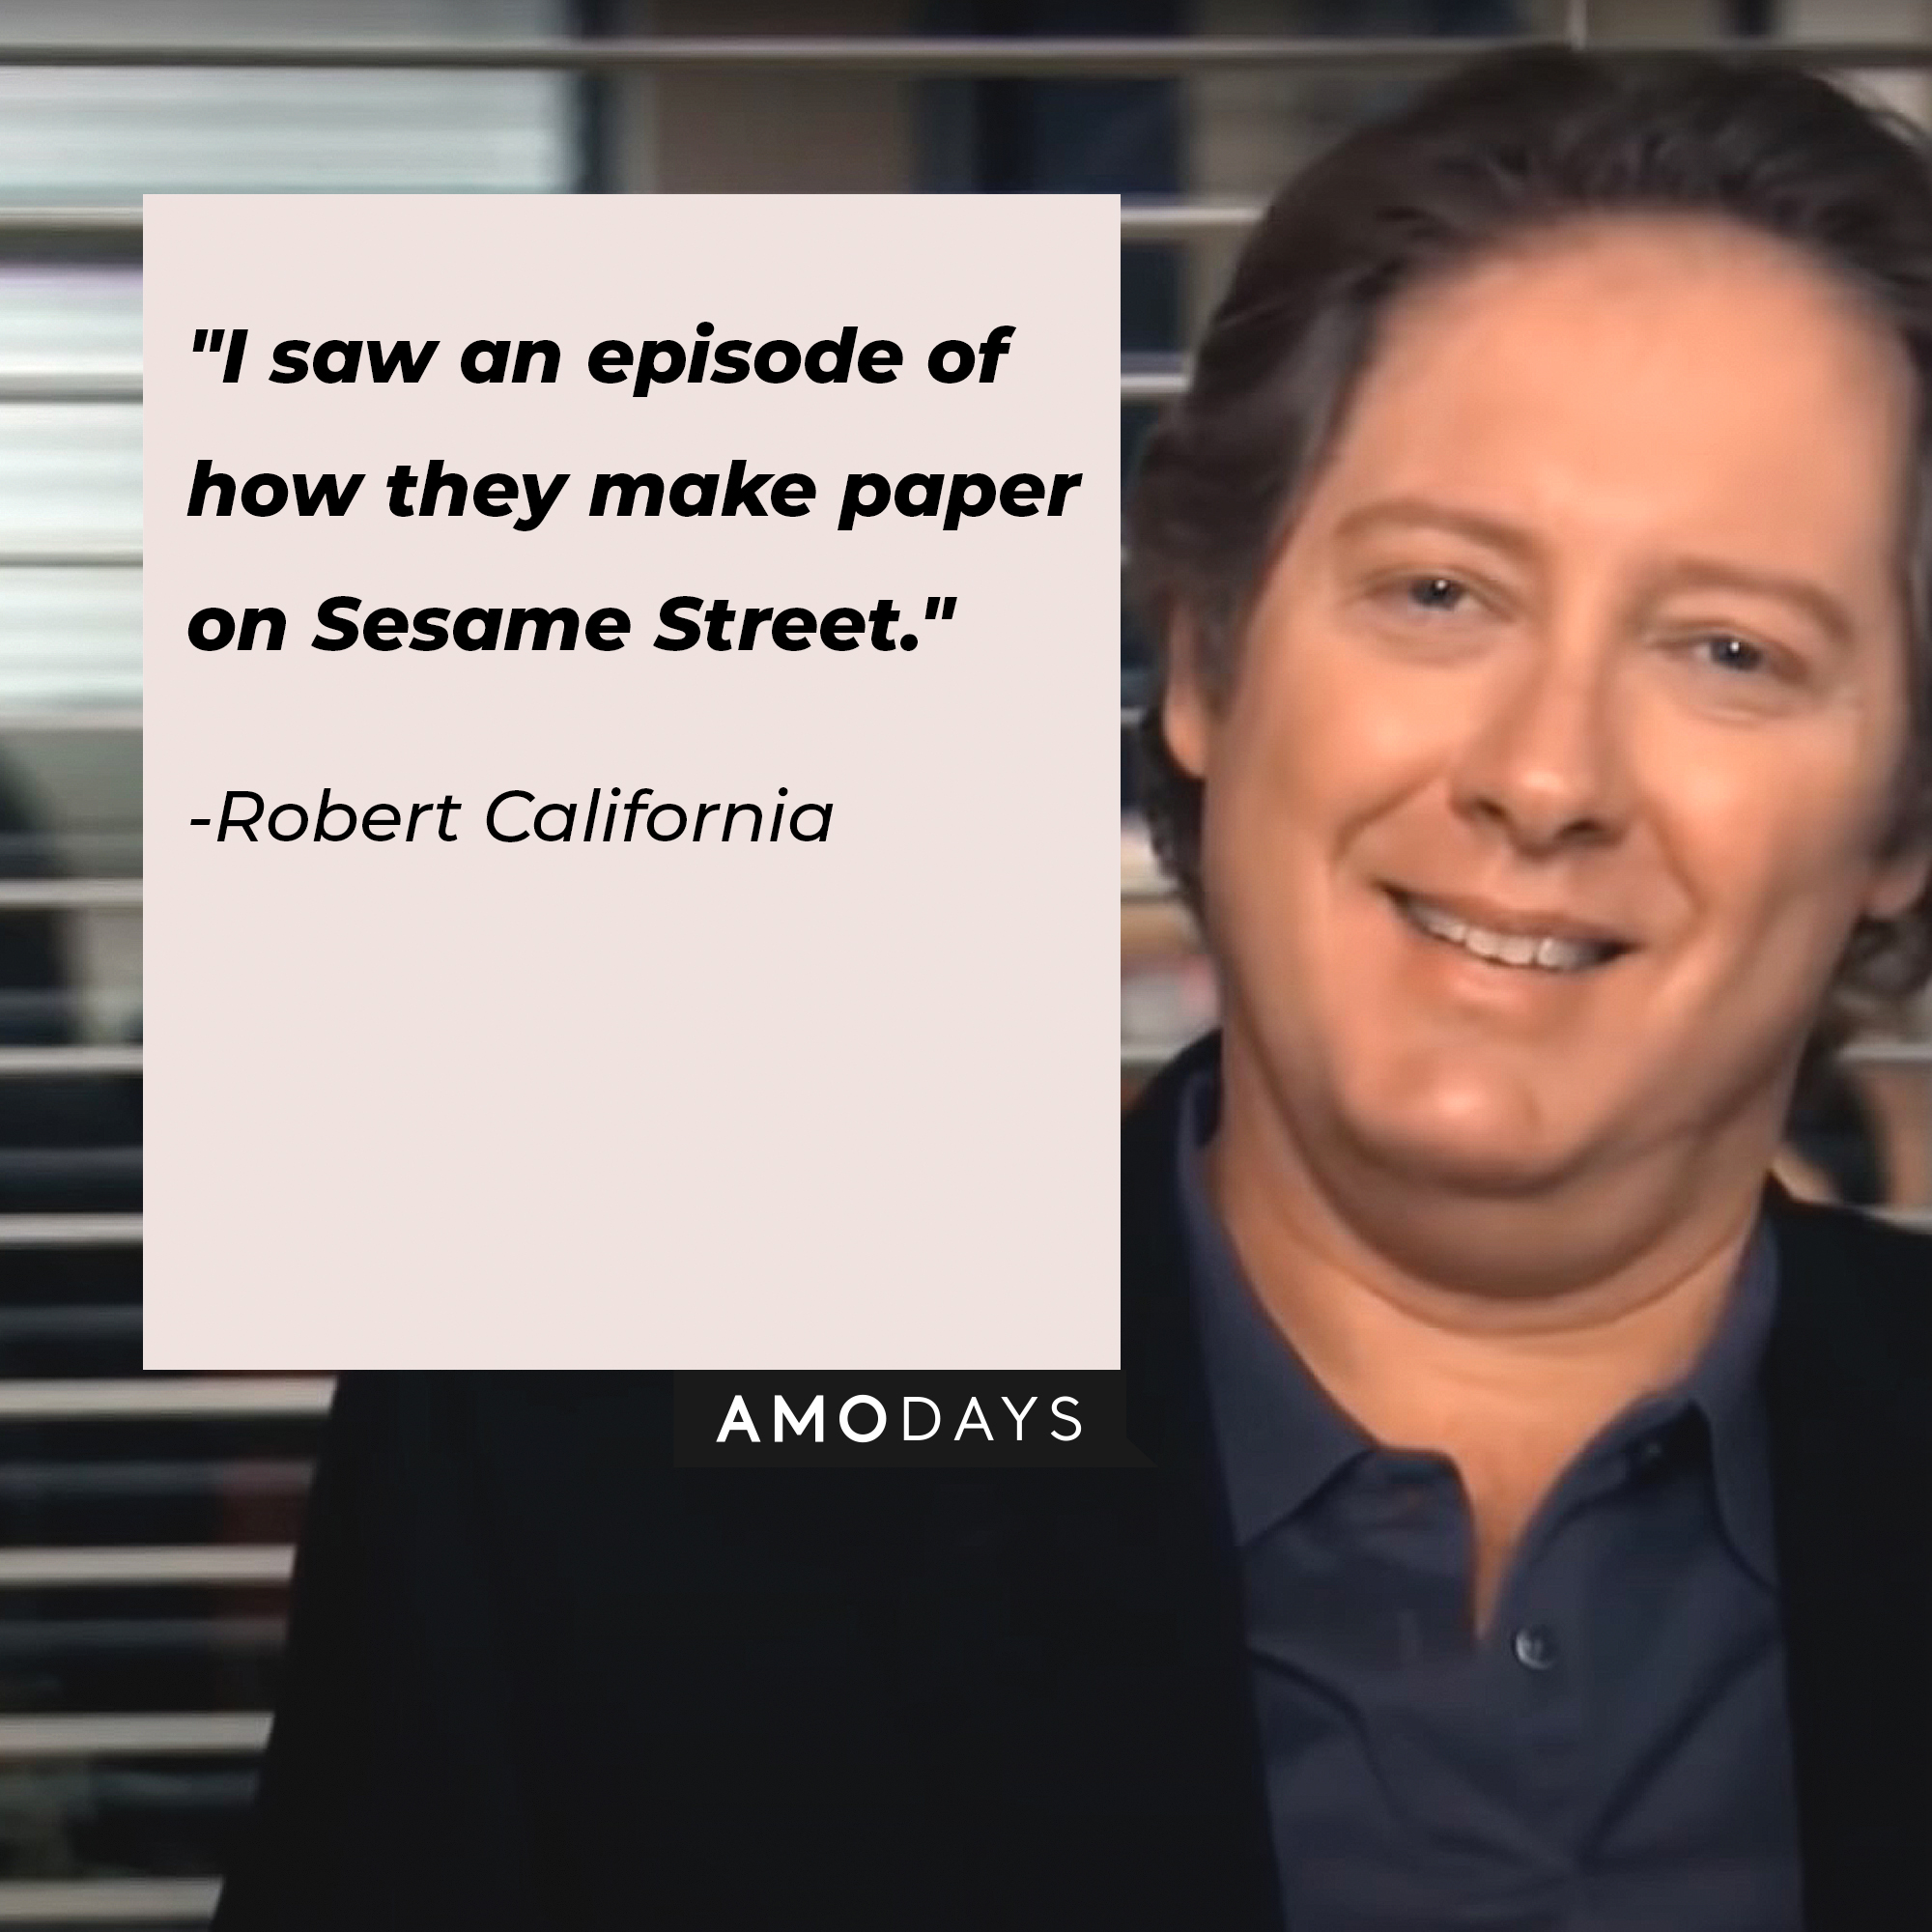 Robert California's quote: "I saw an episode of how they make paper on Sesame Street." | Image: AmoDays